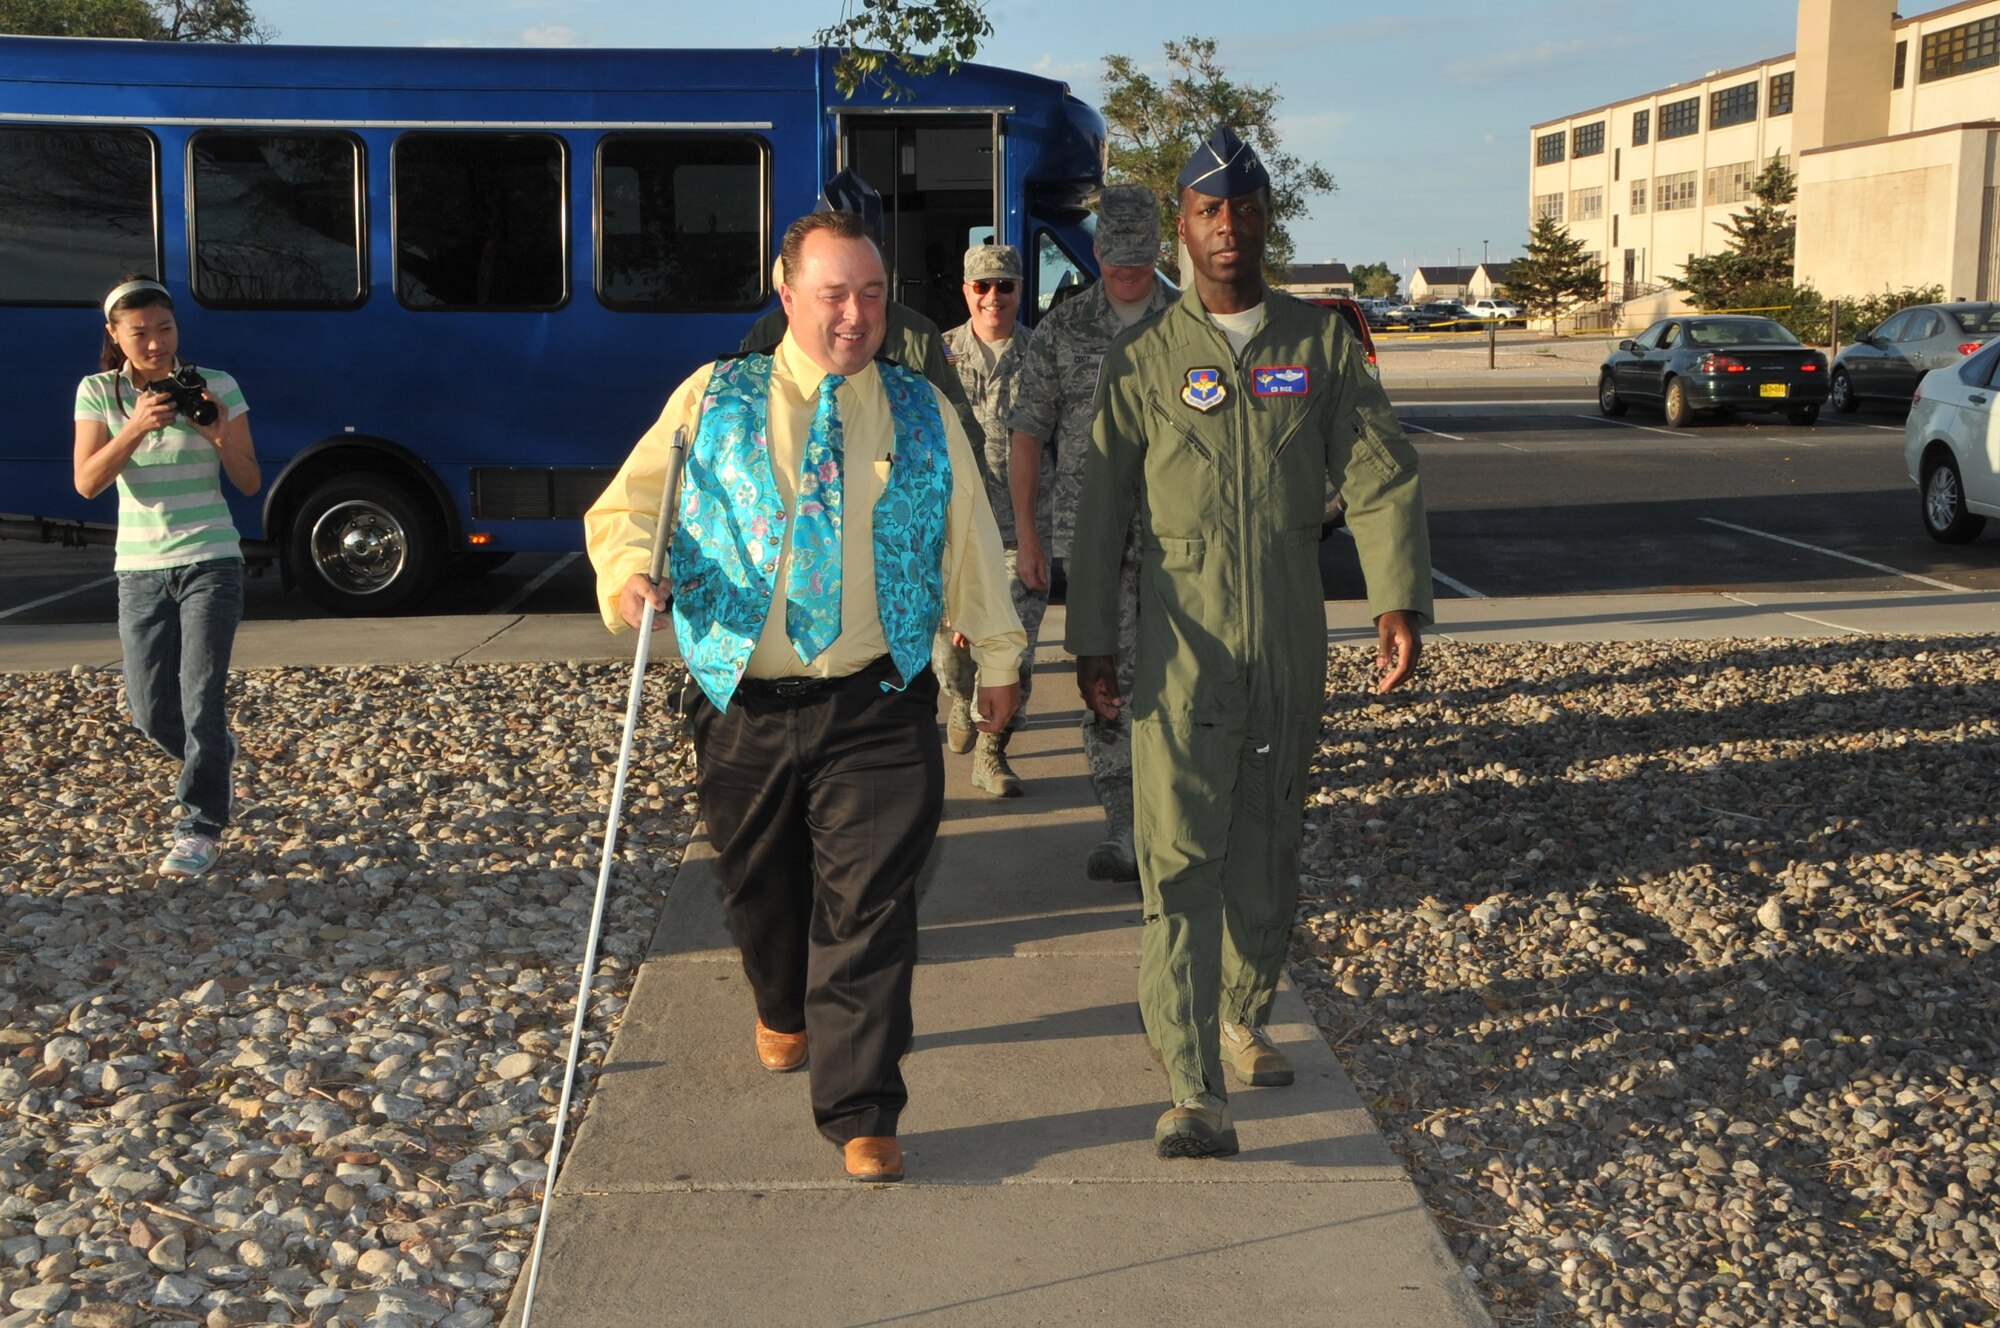 Right, Gen. Edward A. Rice Jr., AETC commander, and Mr. Robert Vick, Thunderbird Inn manager, enter the dining facility.

Photo by Todd Berenger